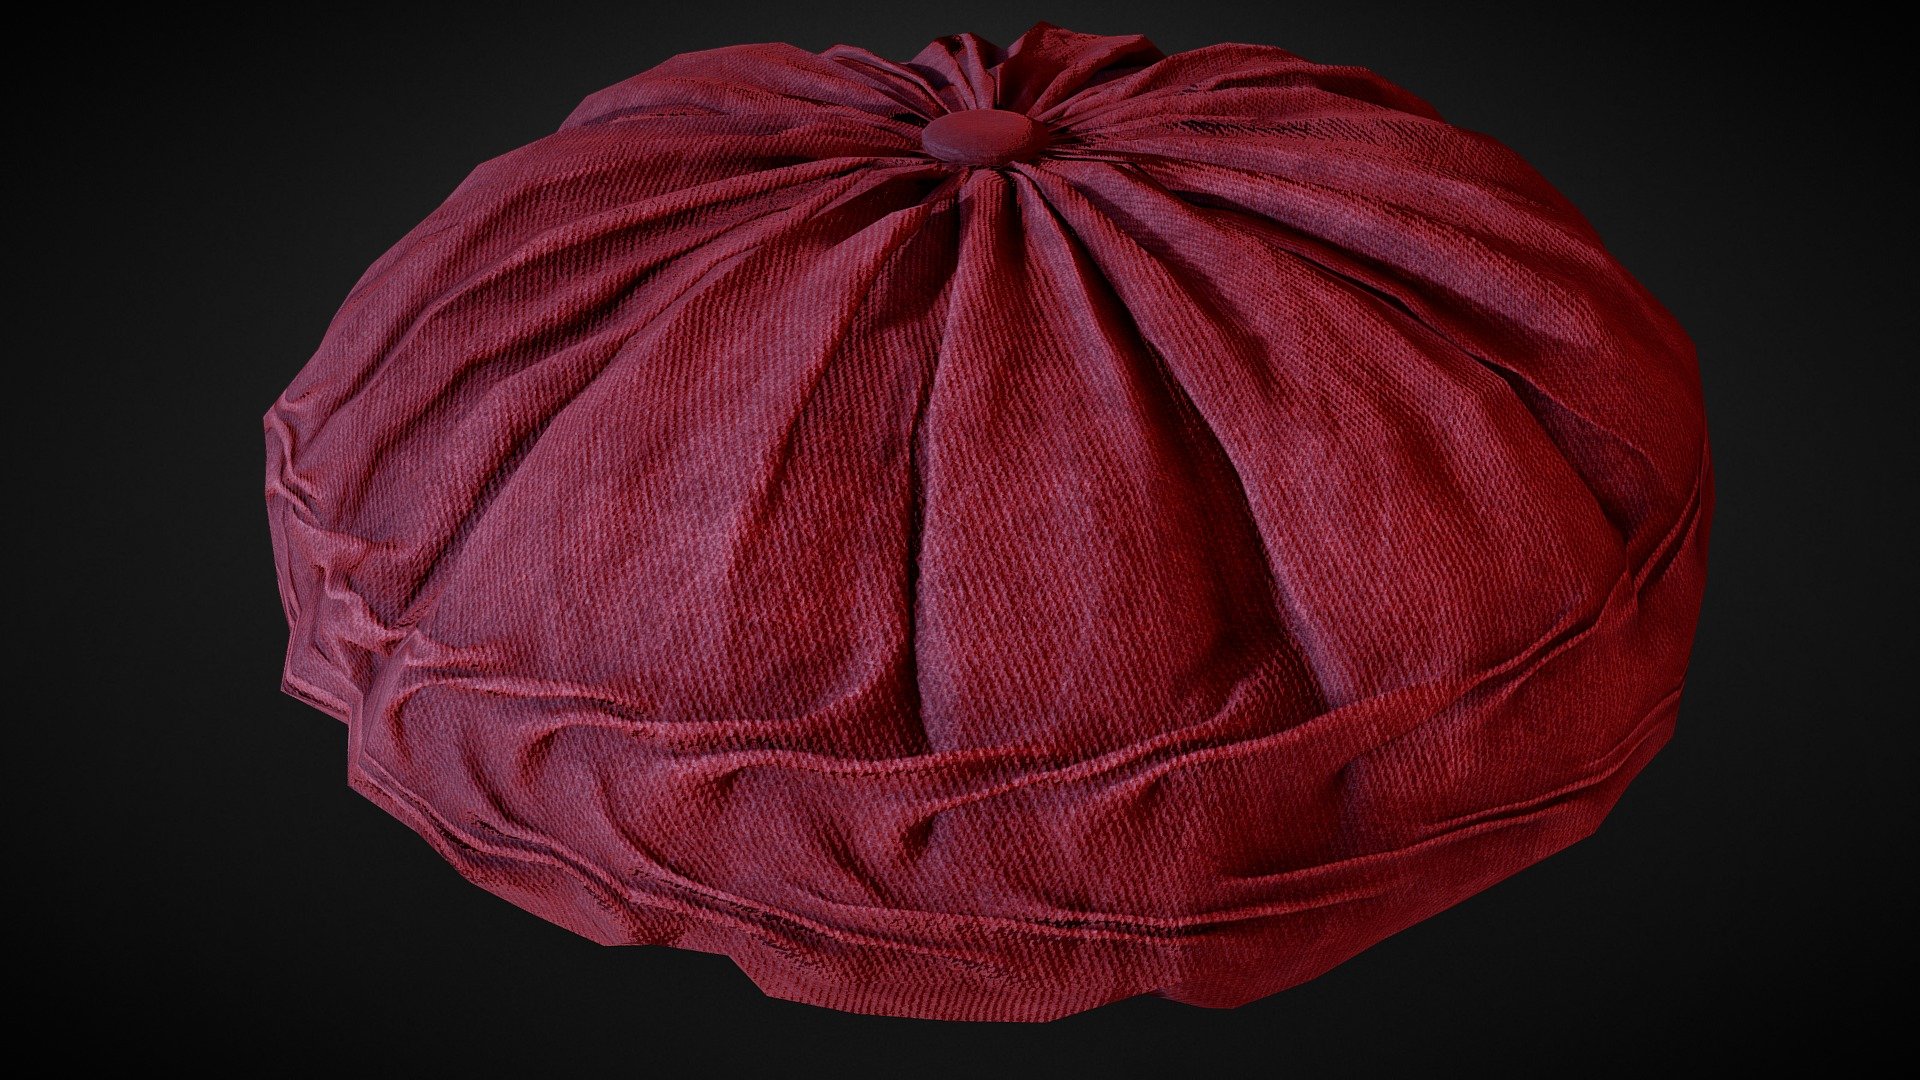 Model of a Pillow. It will also be included in my Horror Bedroom Asset Pack for UE4.

For more of my work you can look here - Old Pillow Preview - 3D model by Tim H. (@eueruntergang) 3d model